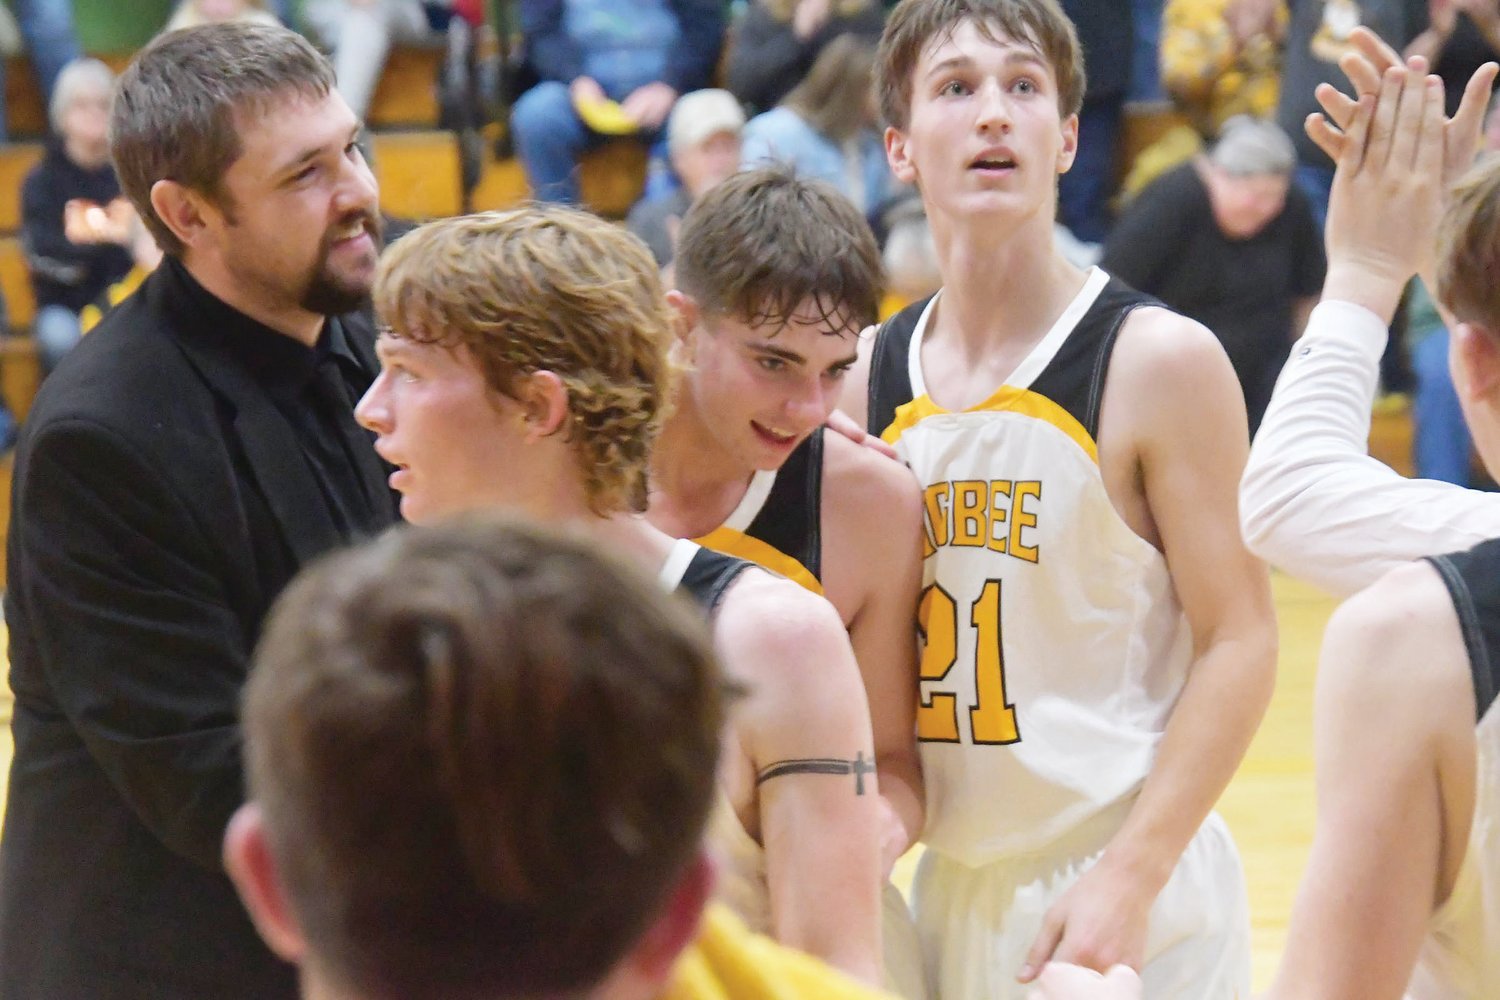 Players react after Derek Rockett scored his 1,000th point during the third quarter of Tuesday's game versus Bevier.